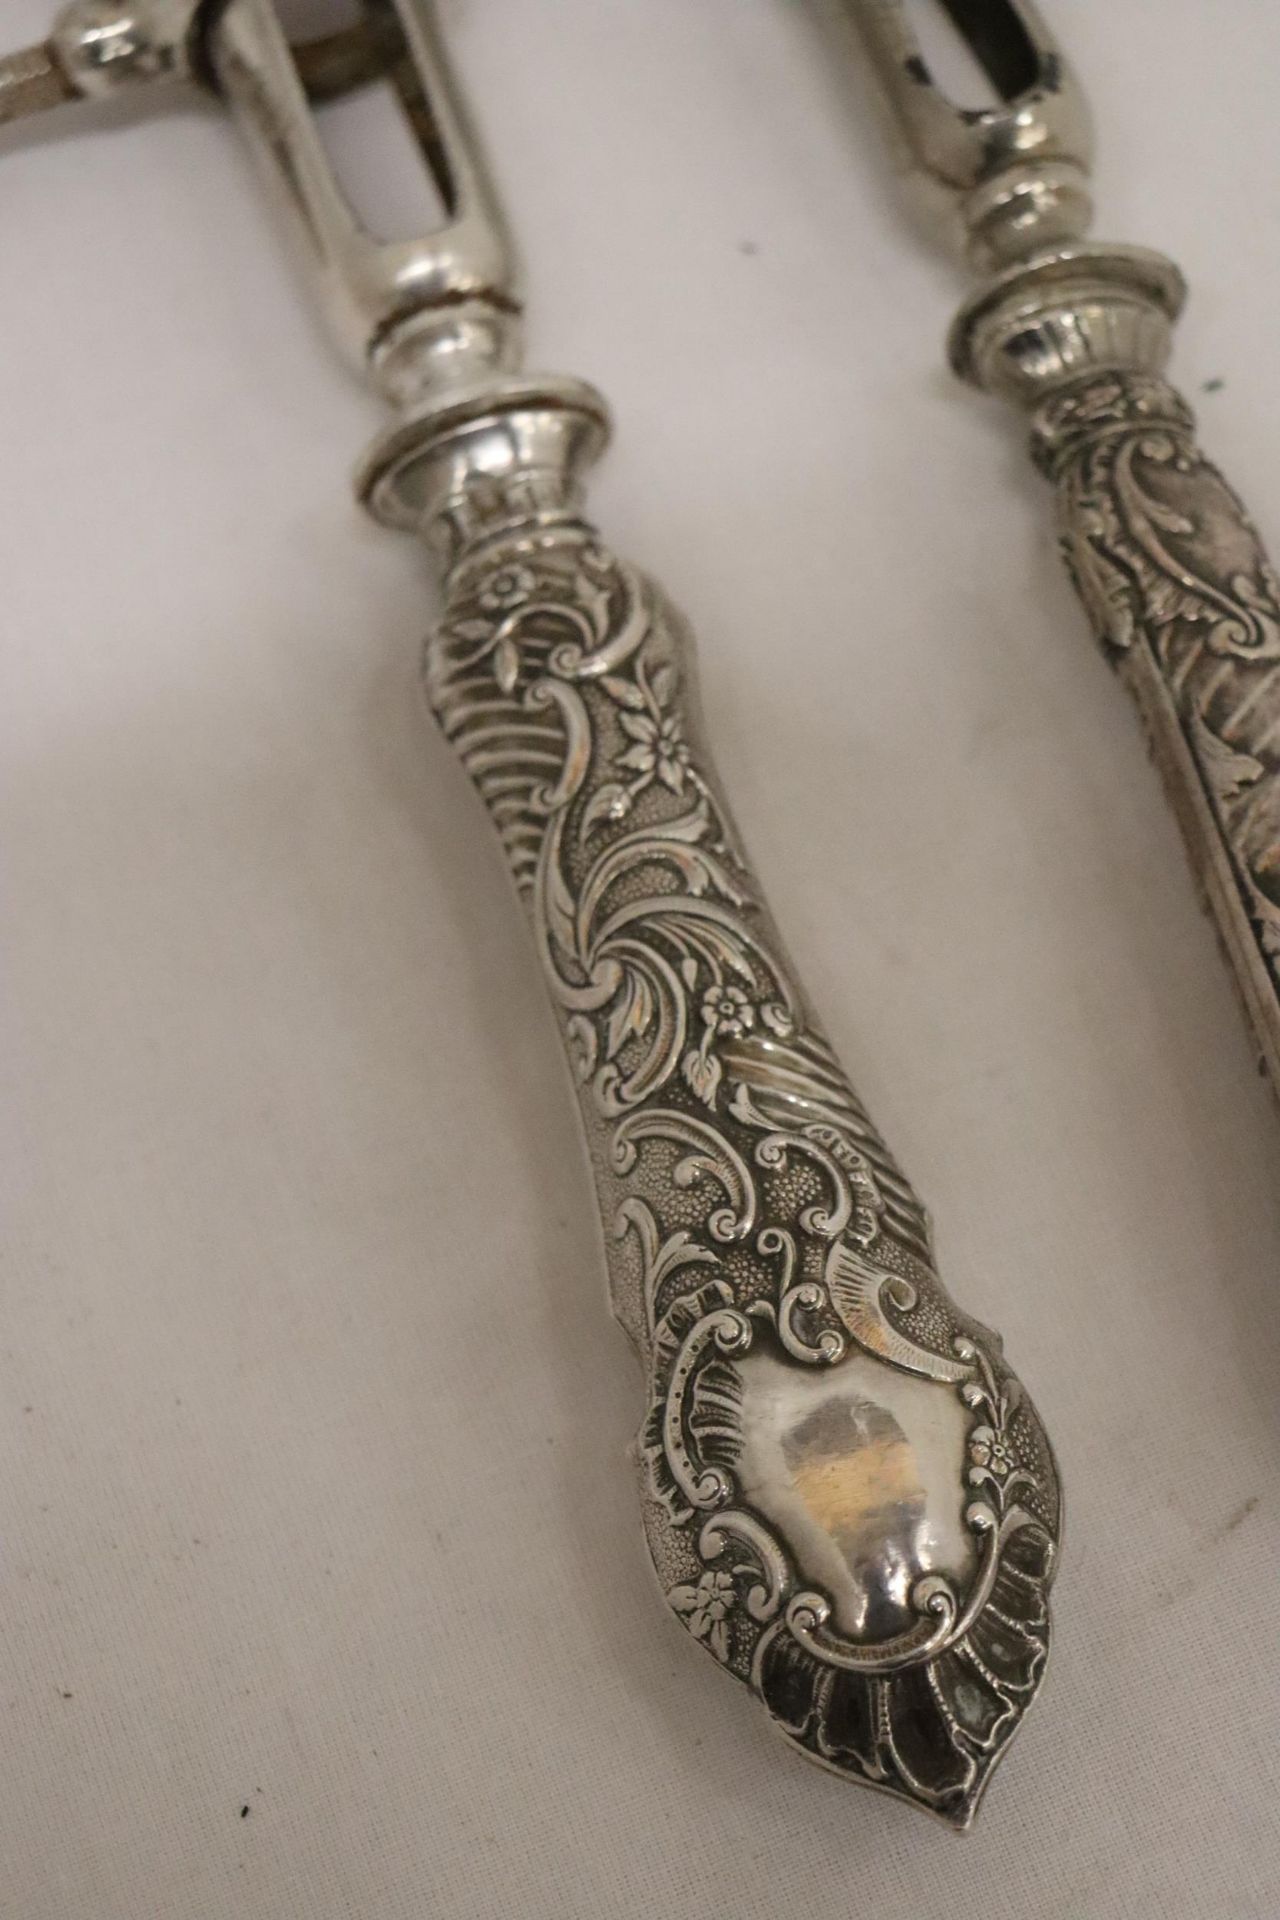 TWO VINTAGE CONTINENTAL, POSSIBLY SILVER, HANDLED GIGOT LAMB SHANK/HAM BONE HOLDERS - Image 2 of 6